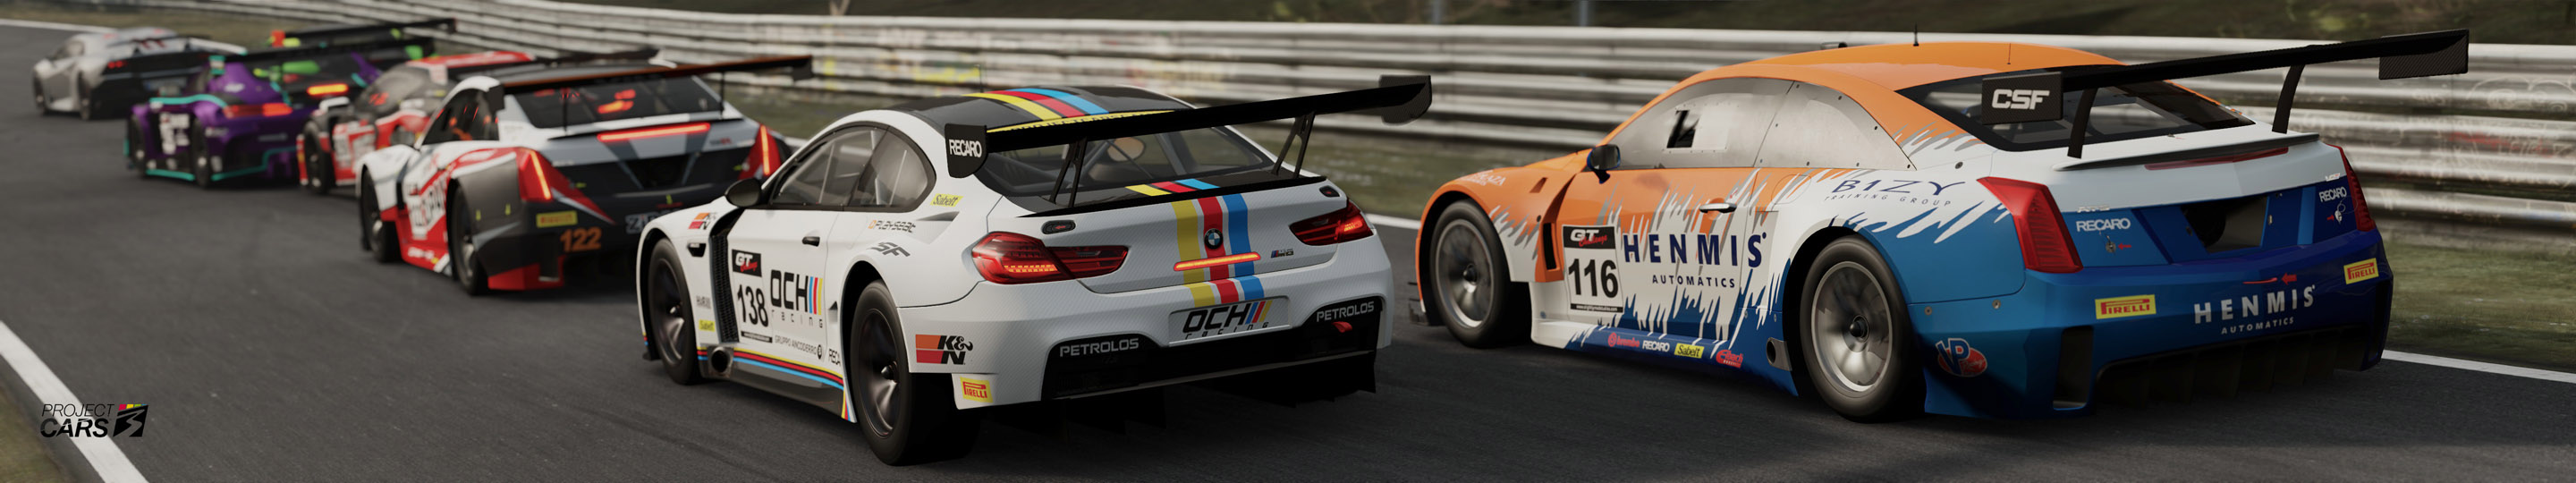 1 PROJECT CARS 3 GT3 at NORDSCHLEIFE copy.jpg